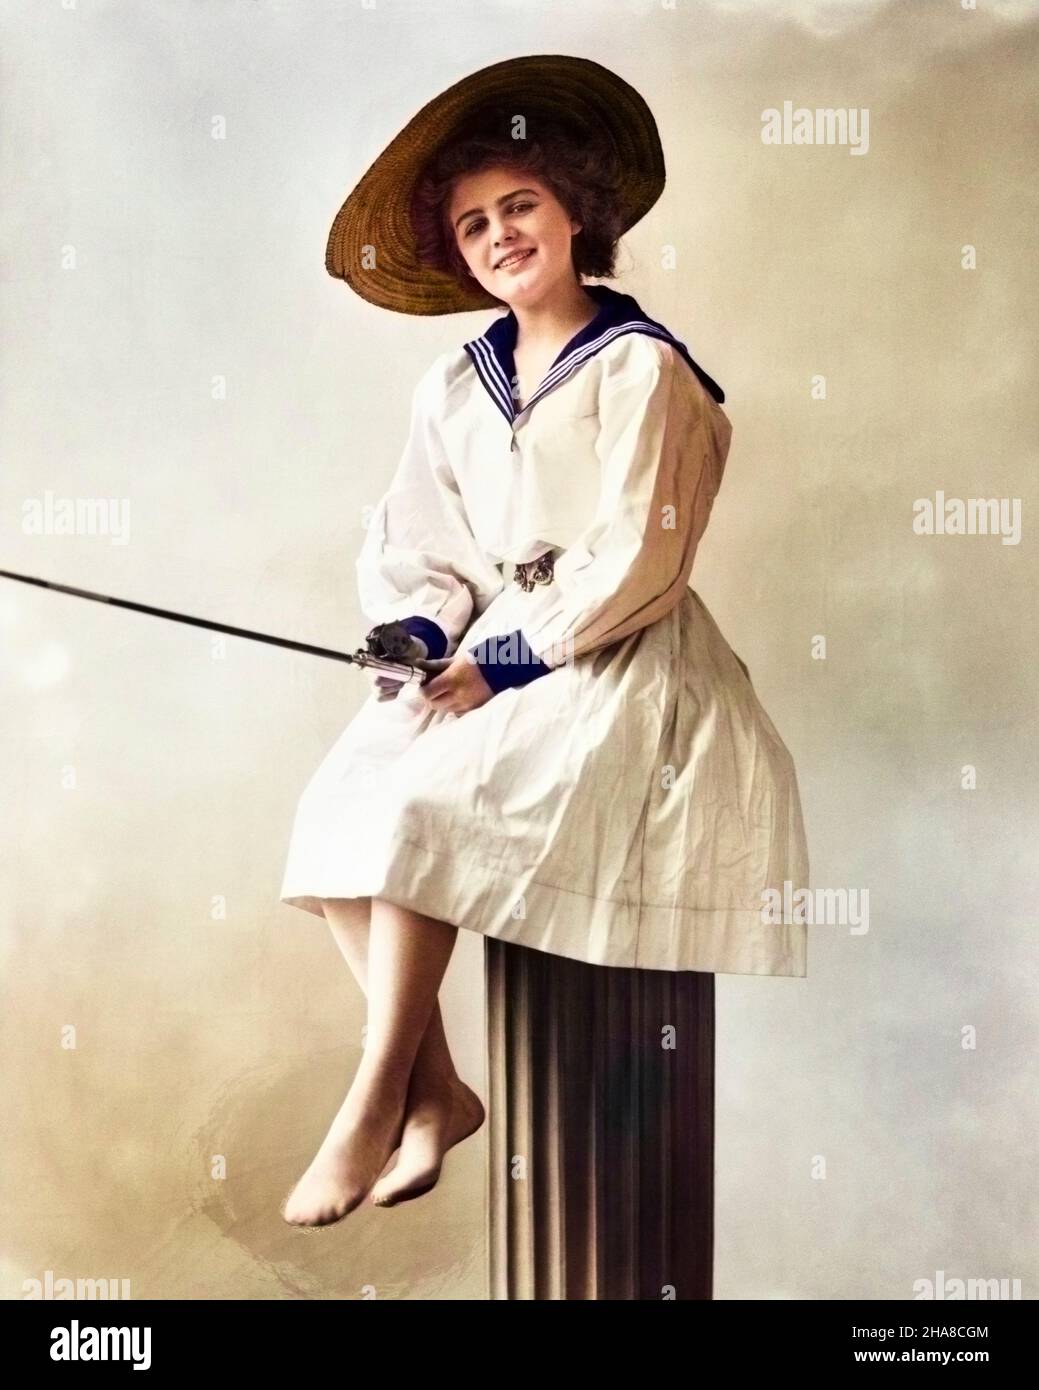 1900s 1910s WOMAN WEARING DRESS WITH SAILOR STYLE COLLAR STRAW HAT LOOKING AT CAMERA SITTING ON DOCK PILING WITH FISHING ROD - o2771c HAR001 HARS OLD FASHION 1 FACIAL STYLE POLE ATHLETE PLEASED JOY LIFESTYLE SAILOR FEMALES STUDIO SHOT GROWNUP HEALTHINESS COPY SPACE FULL-LENGTH LADIES PERSONS GROWN-UP ATHLETIC ROD TACKLE EXPRESSIONS ANGLER LINEN EYE CONTACT POLES HAPPINESS FISHING POLE FISHING TACKLE CHEERFUL HOBBY LEISURE HOBBIES RECREATION BAREFOOT SMILES JOYFUL ANGLING FISHING ROD PLEASANT PEOPLE ADULTS YOUNG ADULT WOMAN CAUCASIAN ETHNICITY HAR001 OLD FASHIONED Stock Photo